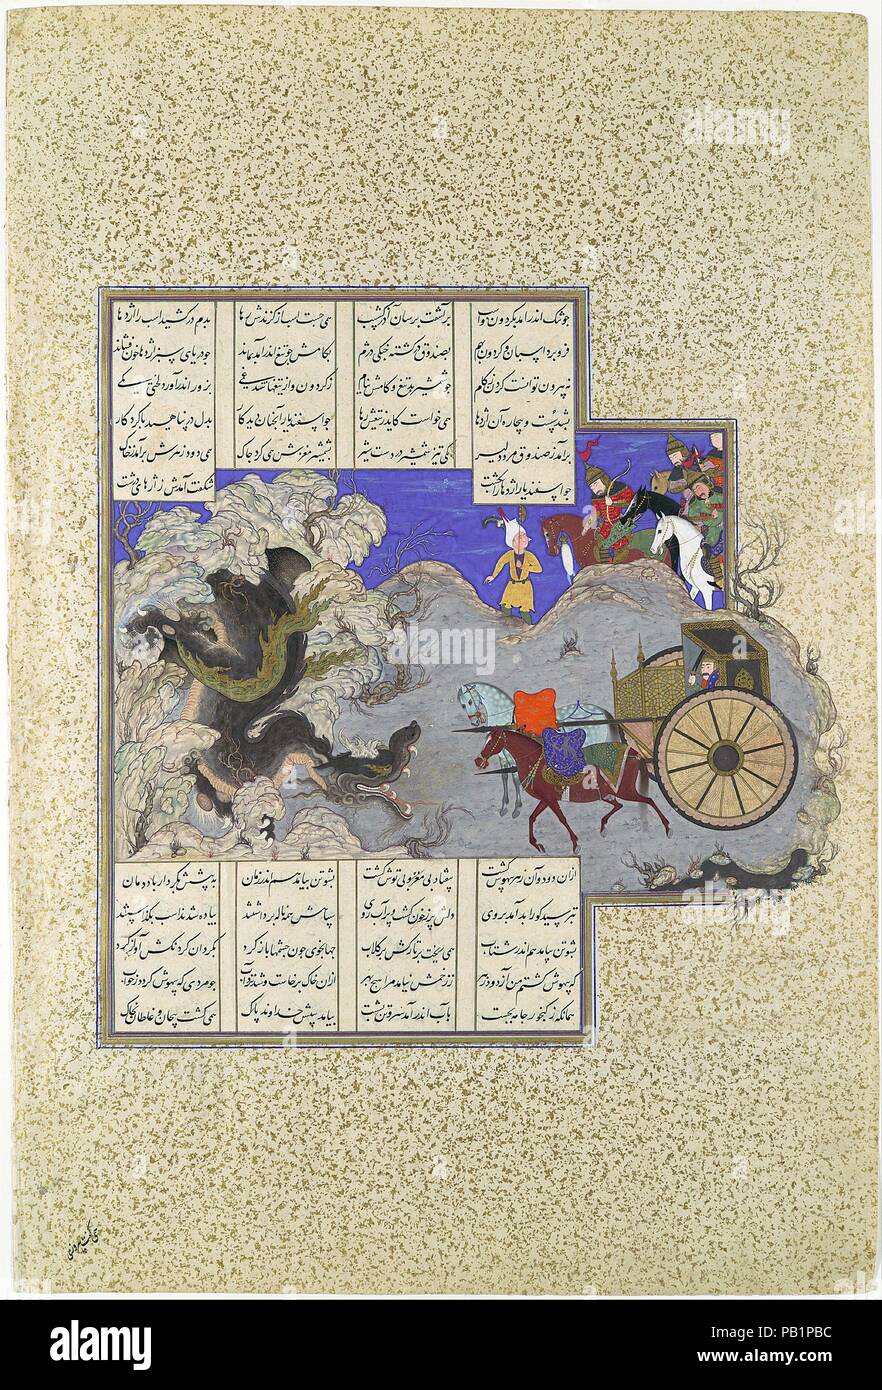 'Isfandiyar's Third Course: He Slays a Dragon', Folio 434v from the Shahnama (Book of Kings) of Shah Tahmasp. Artist: Painting attributed to Qasim ibn 'Ali (active ca. 1525-60). Author: Abu'l Qasim Firdausi (935-1020). Dimensions: Painting: H. 11 in. (27.9 cm)   W. 10 5/16 in. (26.2 cm)  Page: H. 18 5/8 in. (47.3 cm)  W. 12 1/2 in. (31.8 cm)  Mat: H. 22 in. (55.9 cm)   W. 16 in.  (40.6 cm)  Mat: H. 22 in. (55.9 cm)  W. 16 in. (40.6 cm). Date: ca. 1530.  This dramatic image illustrates the third of seven challenges, or courses, that Prince Isfandiyar underwent en route to freeing his sisters fr Stock Photo